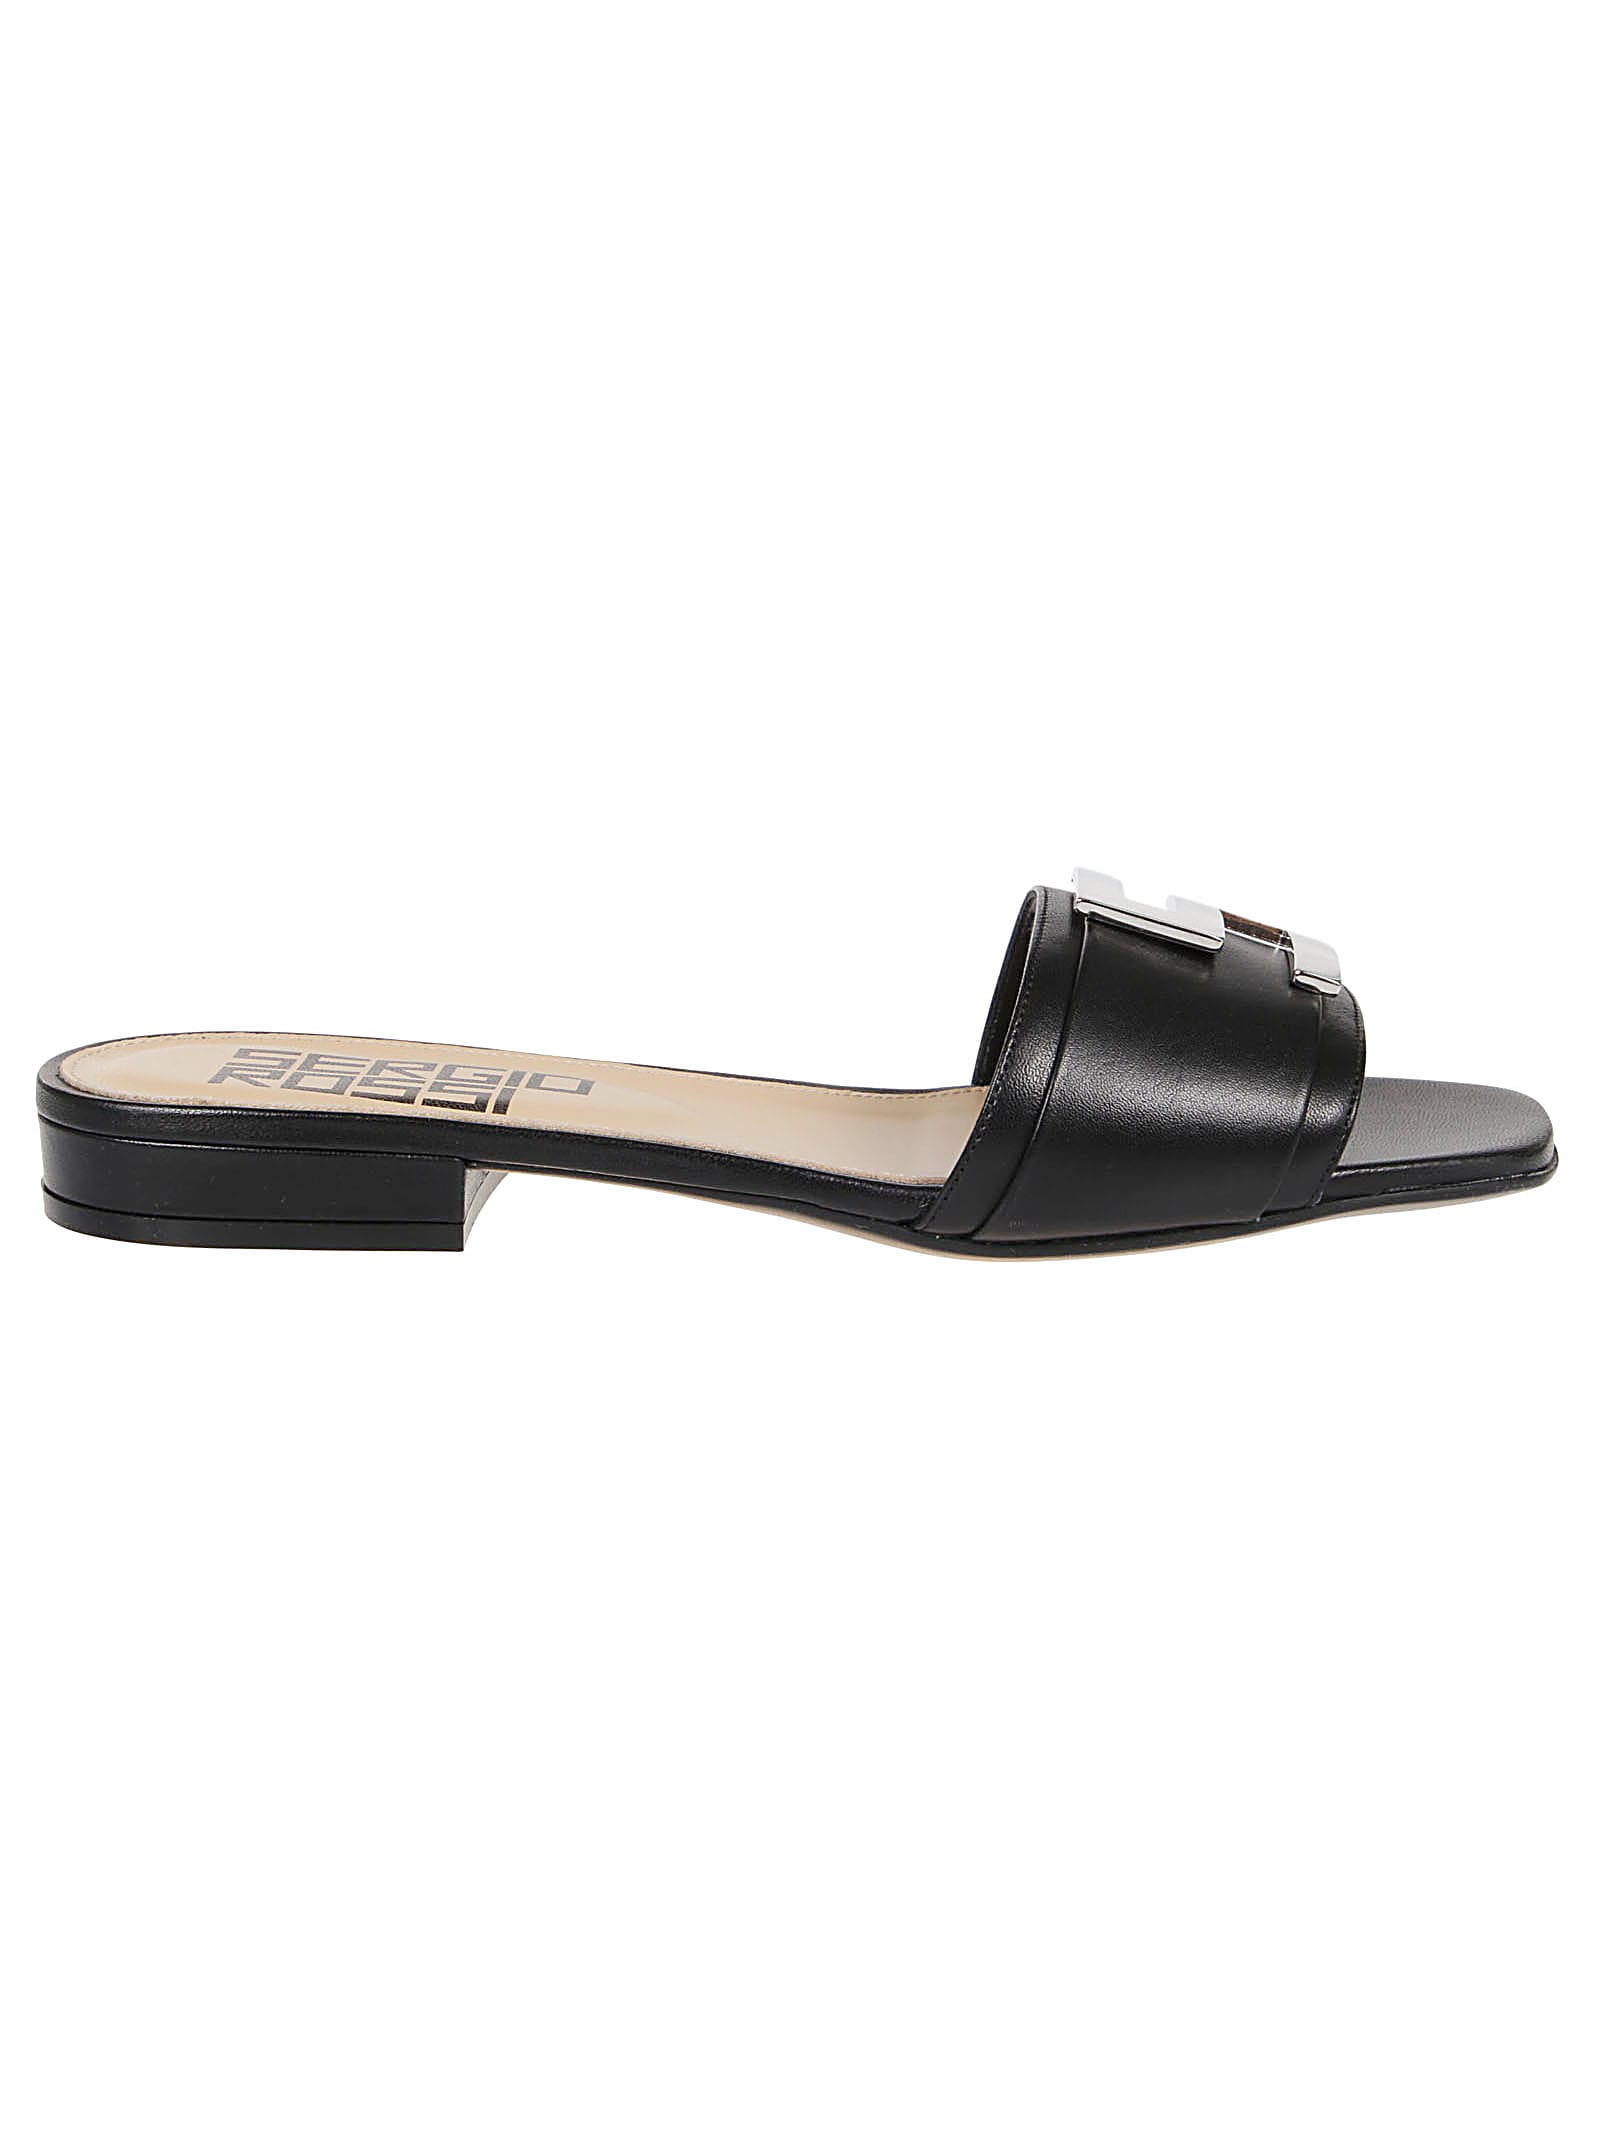 Buy Sergio Rossi Sandal Sergio Logomaniac online, shop Sergio Rossi shoes with free shipping